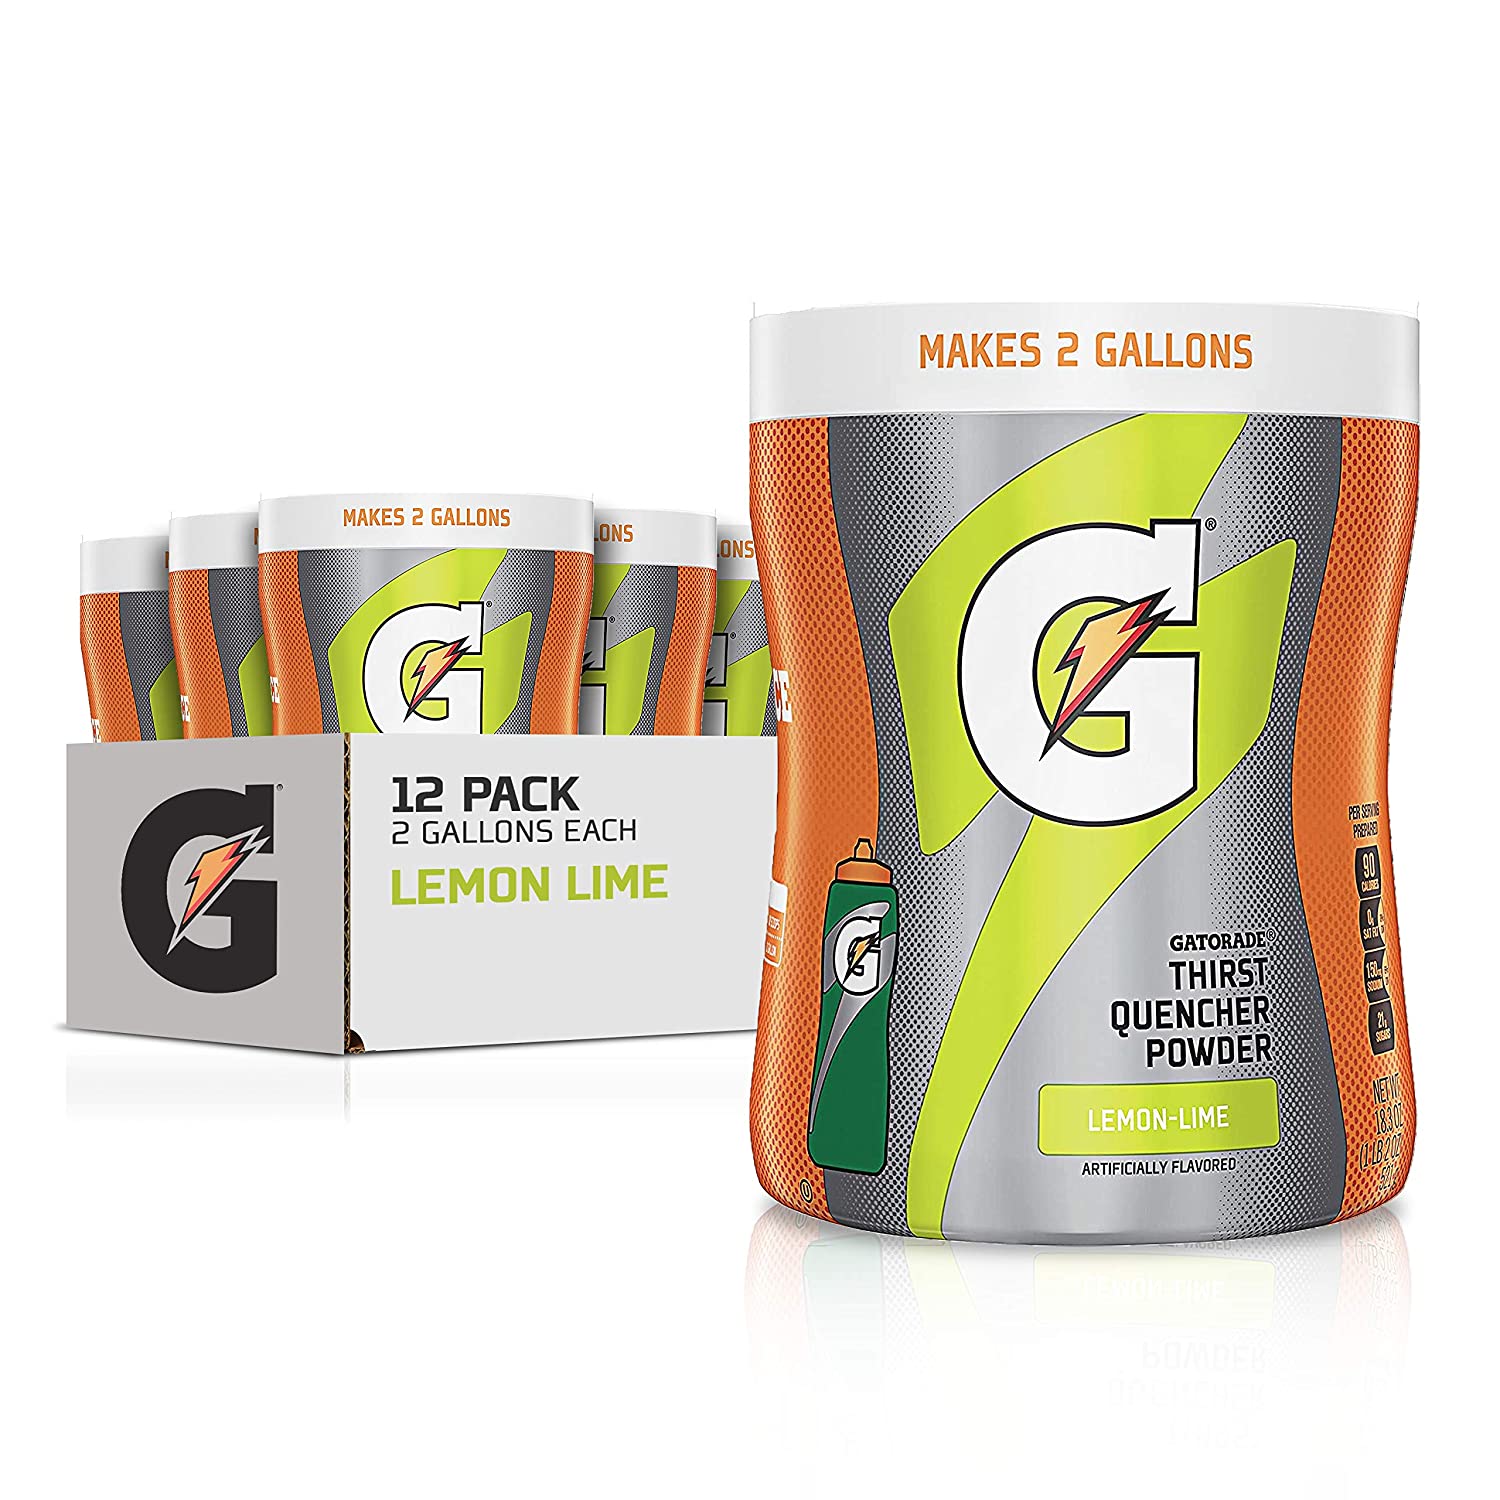 Gatorade Thirst Quencher Lemon Lime Powder, 18.3 Ounce, Pack of 12 - Amazon $16.09